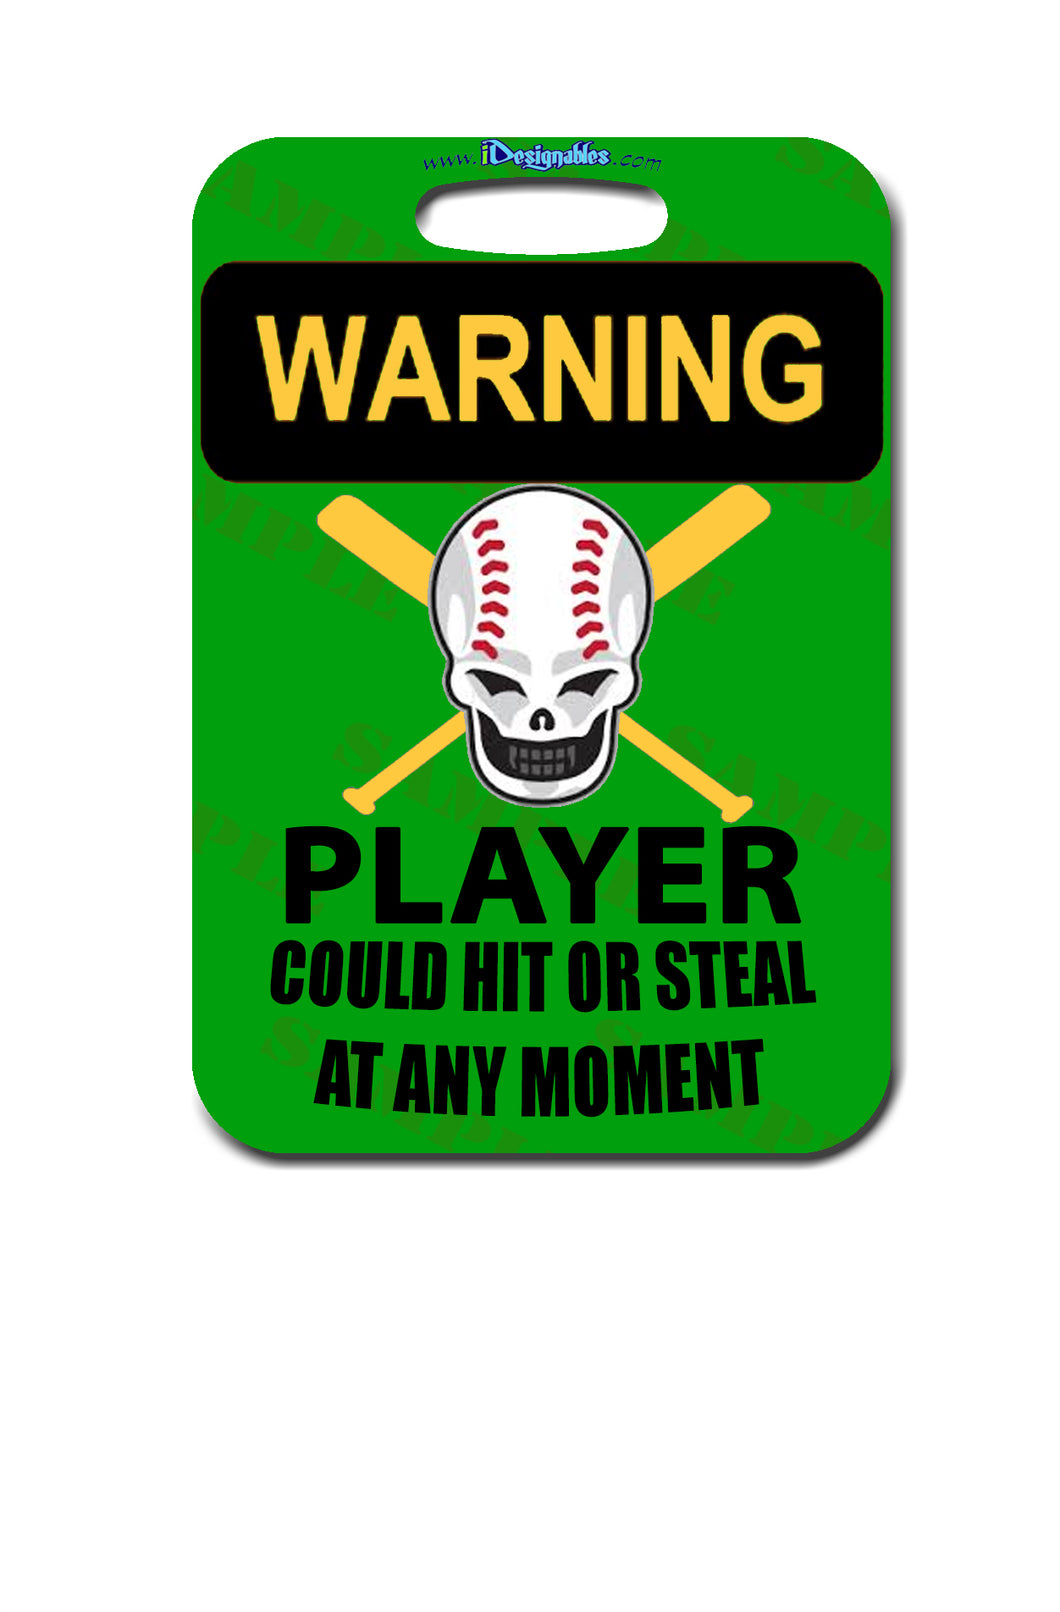 Warning Player Could Hit or Steal at Any Moment